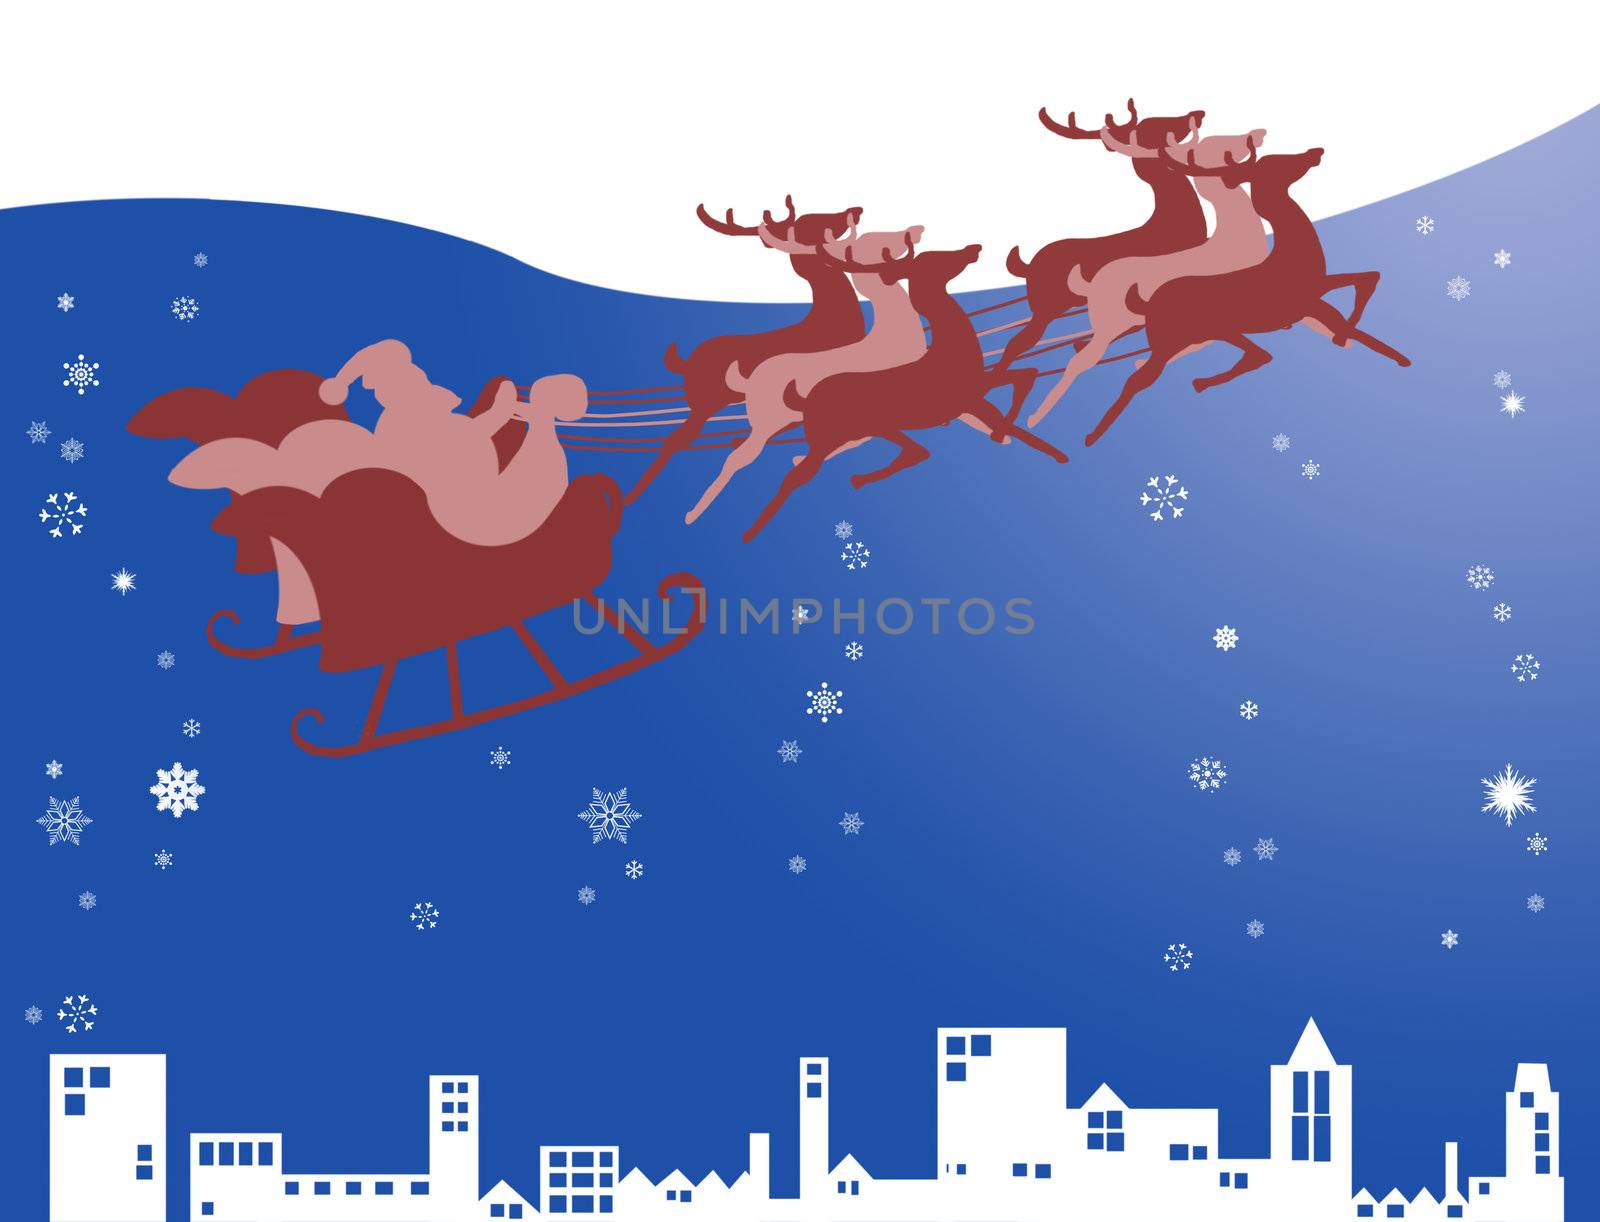 Santa Claus in his sleigh with snow and night sky